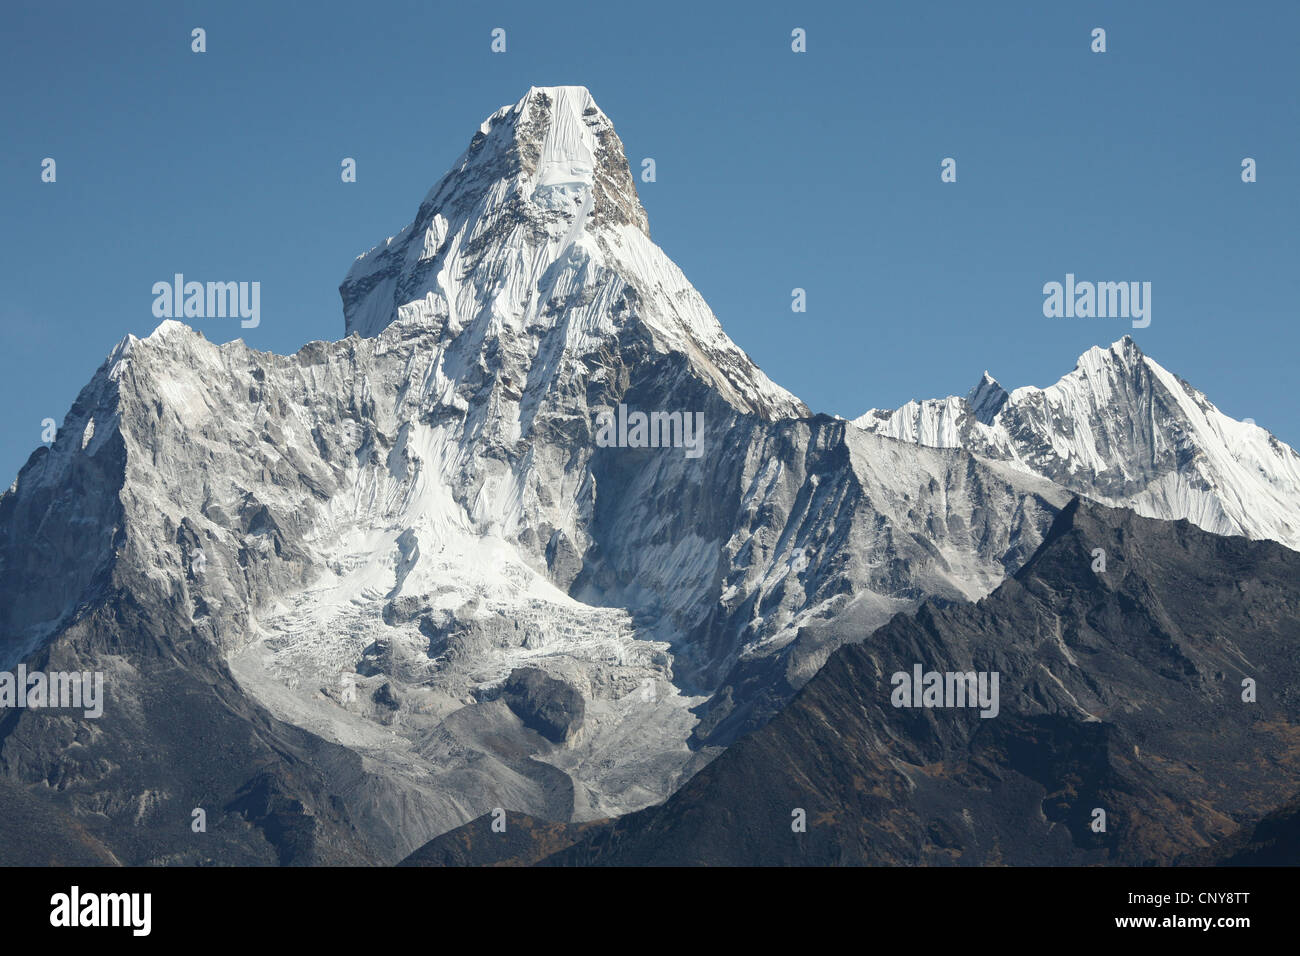 Mount Ama Dablam (6,812 m) in Khumbu region in the Himalayas, Nepal. View from Khunde village. Stock Photo